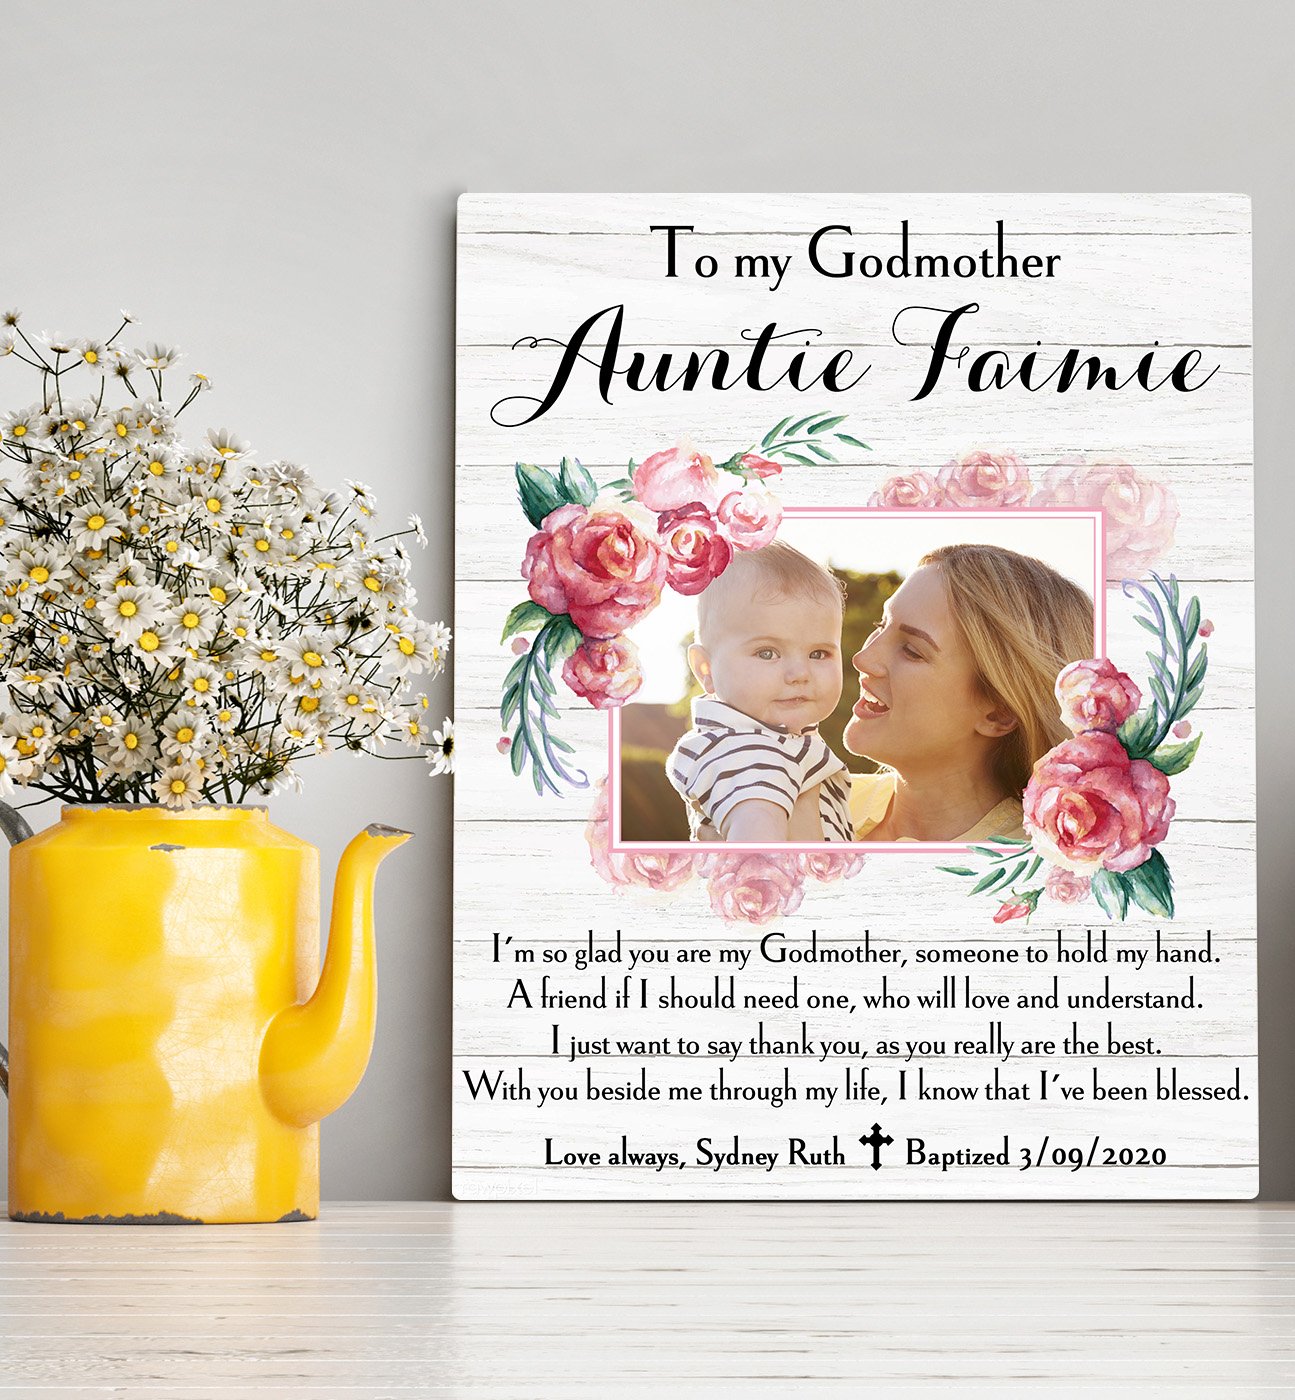 Custom personalized photo to canvas prints wall art Mother's day gifts idea, pictures on canvas Christmas, birthday presents for daughter & son - Thank You Godmother